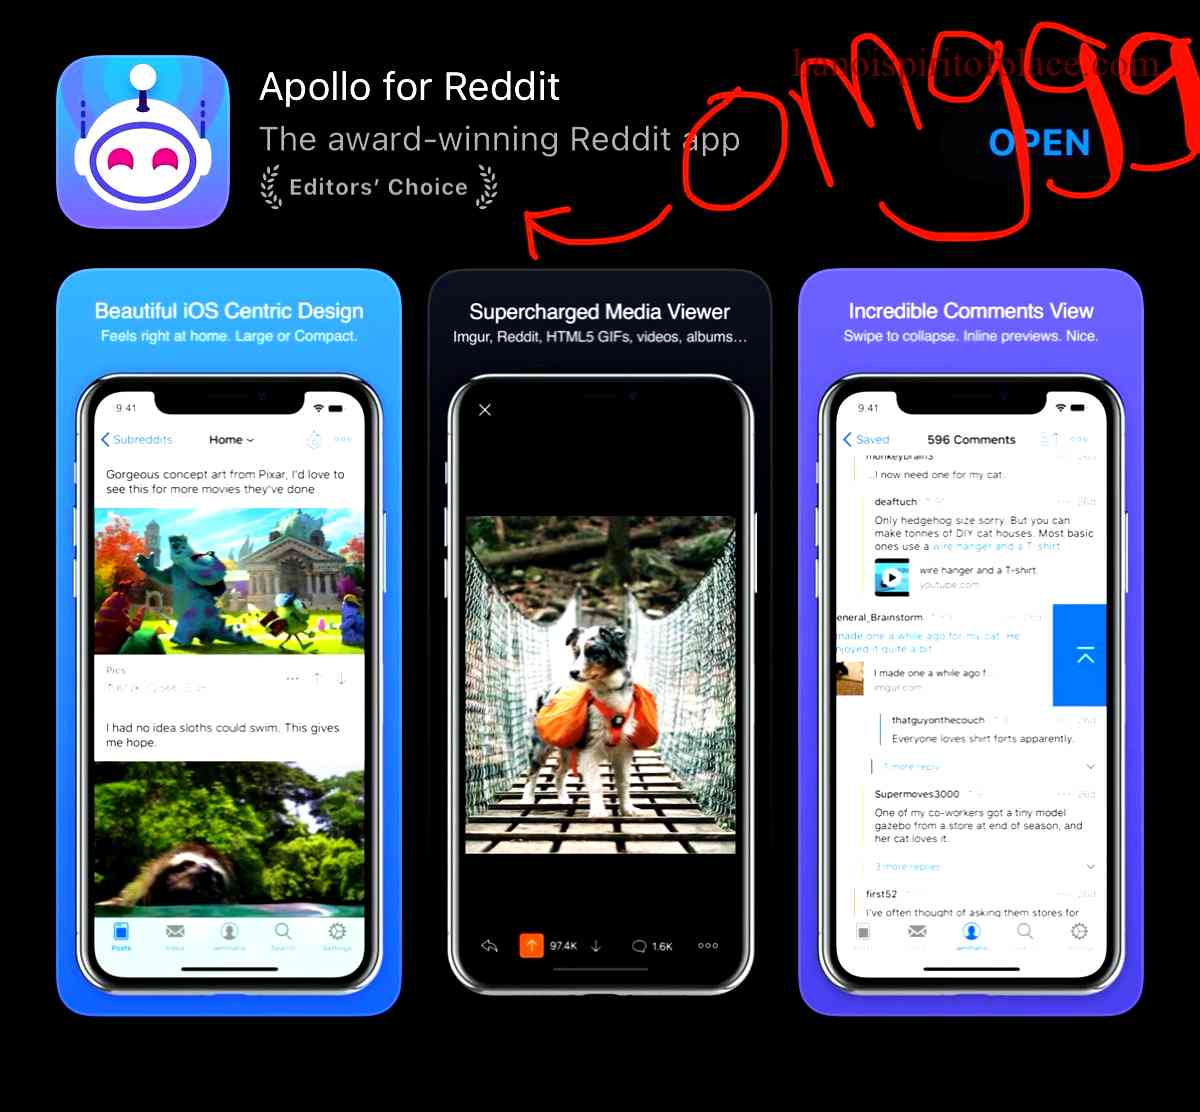 How to get started with Apollo App Reddit